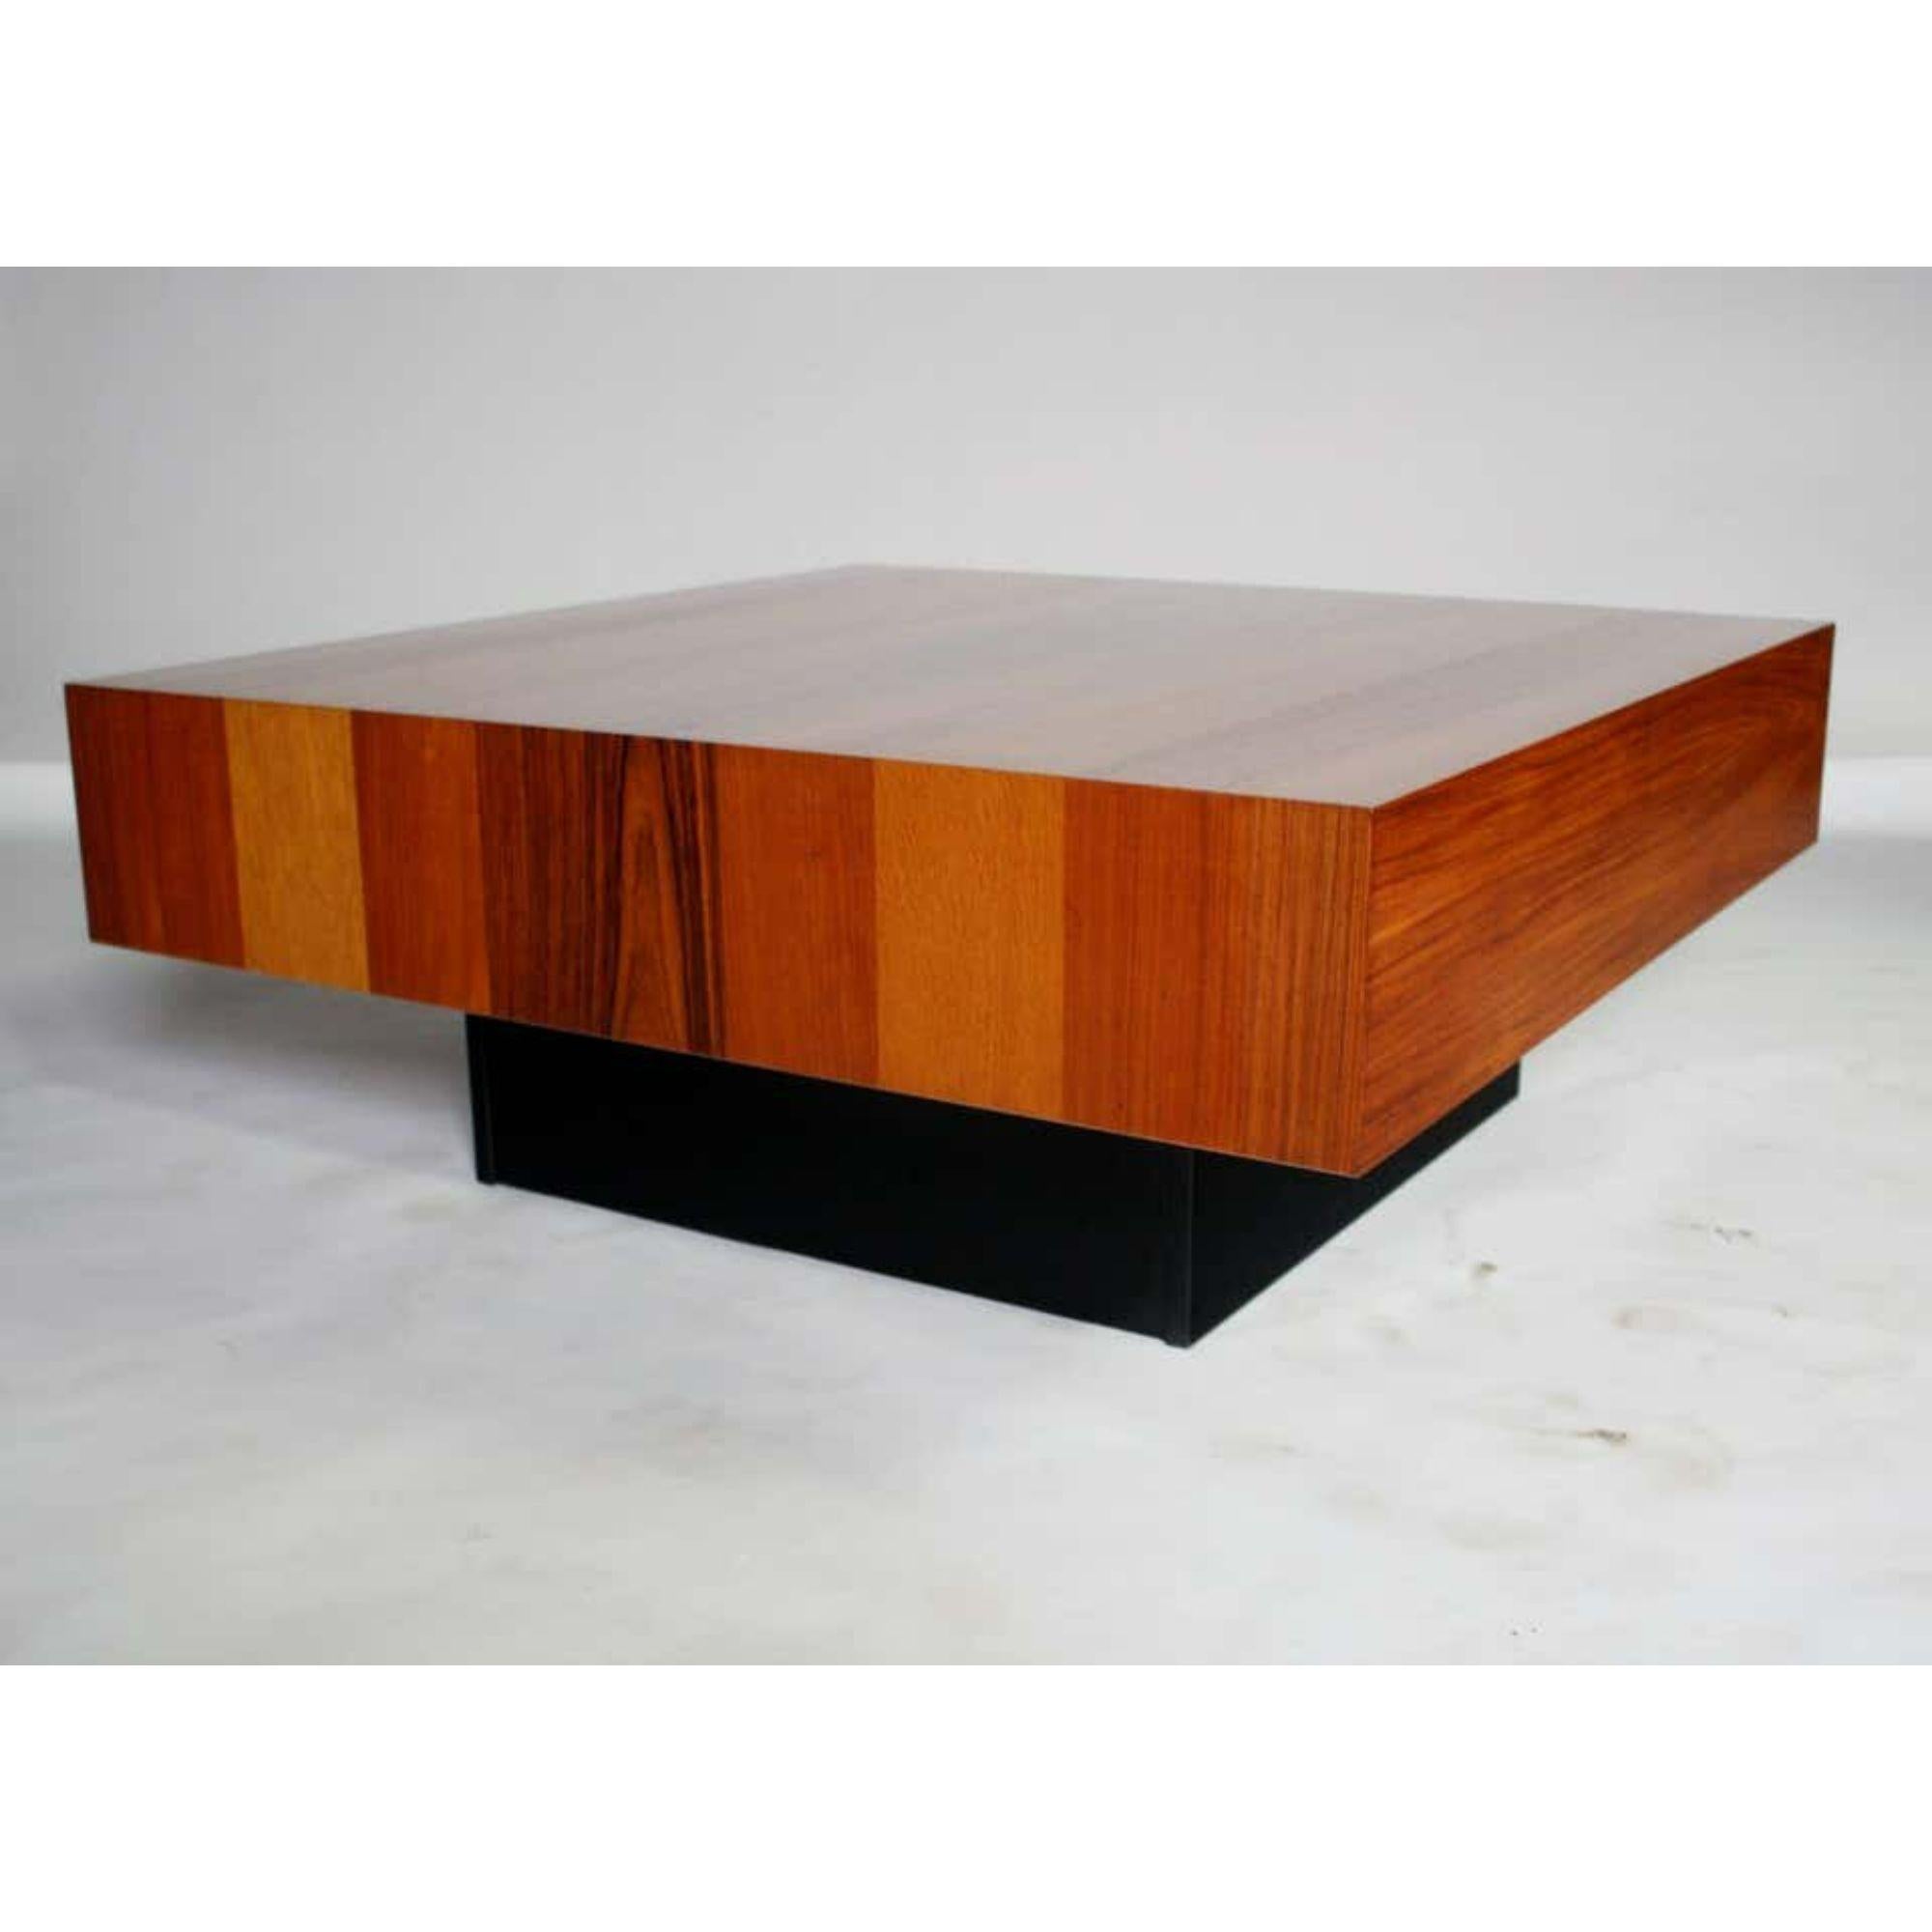 Beautiful square wood coffee table by Drylund of Denmark designed in a parquetry of rosewood, Palisander, teak and maple resting on a black lacquered cube base. In the style of Milo Baughman.

Additional information:
Materials: Lacquer Maple,